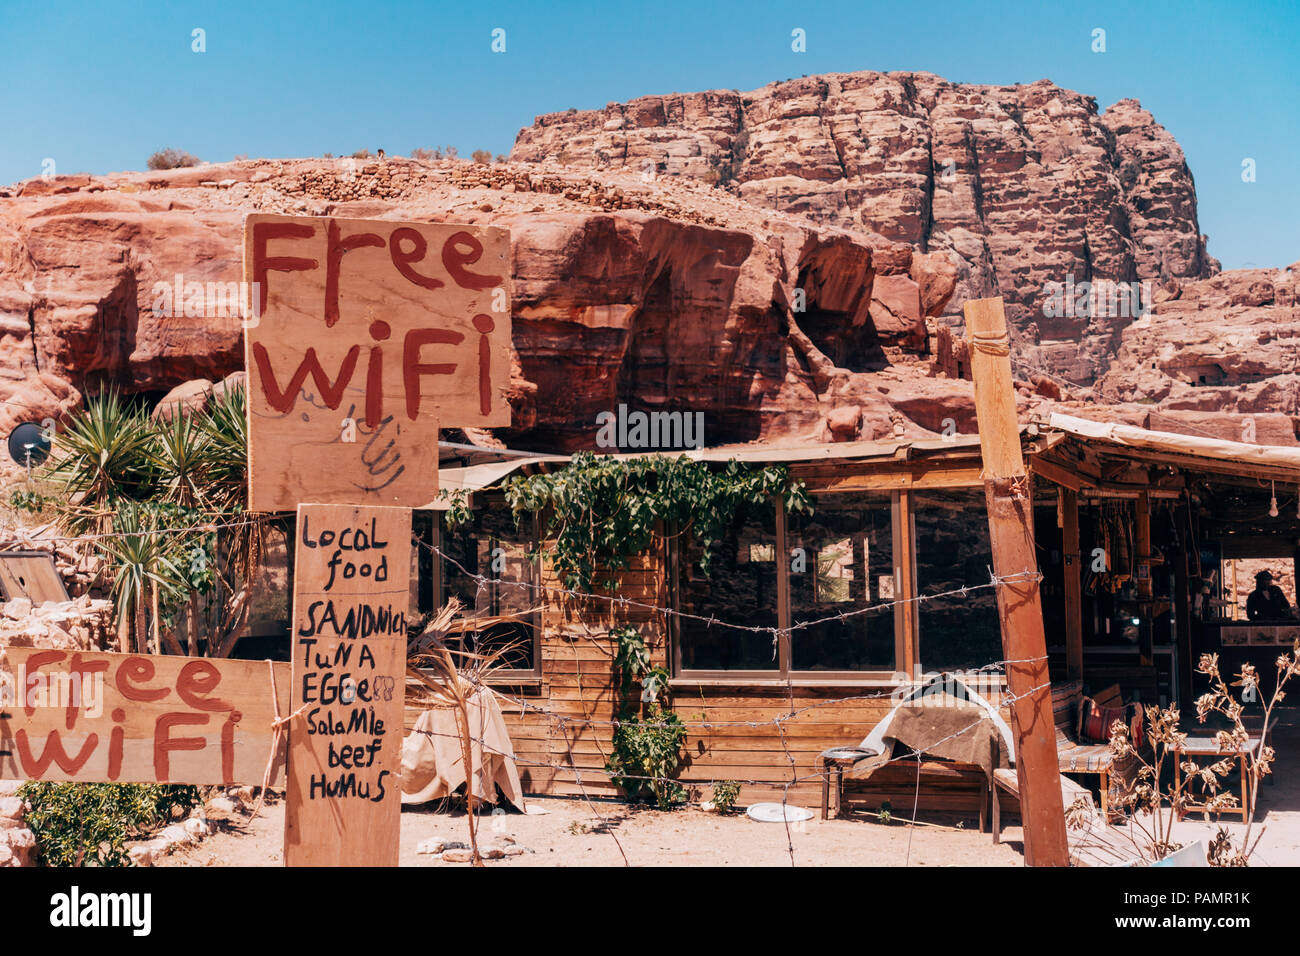 a wooden hut restaurant in the Lost City of Petra, Jordan, tries to lure customers by promoting their food menu and wifi internet Stock Photo